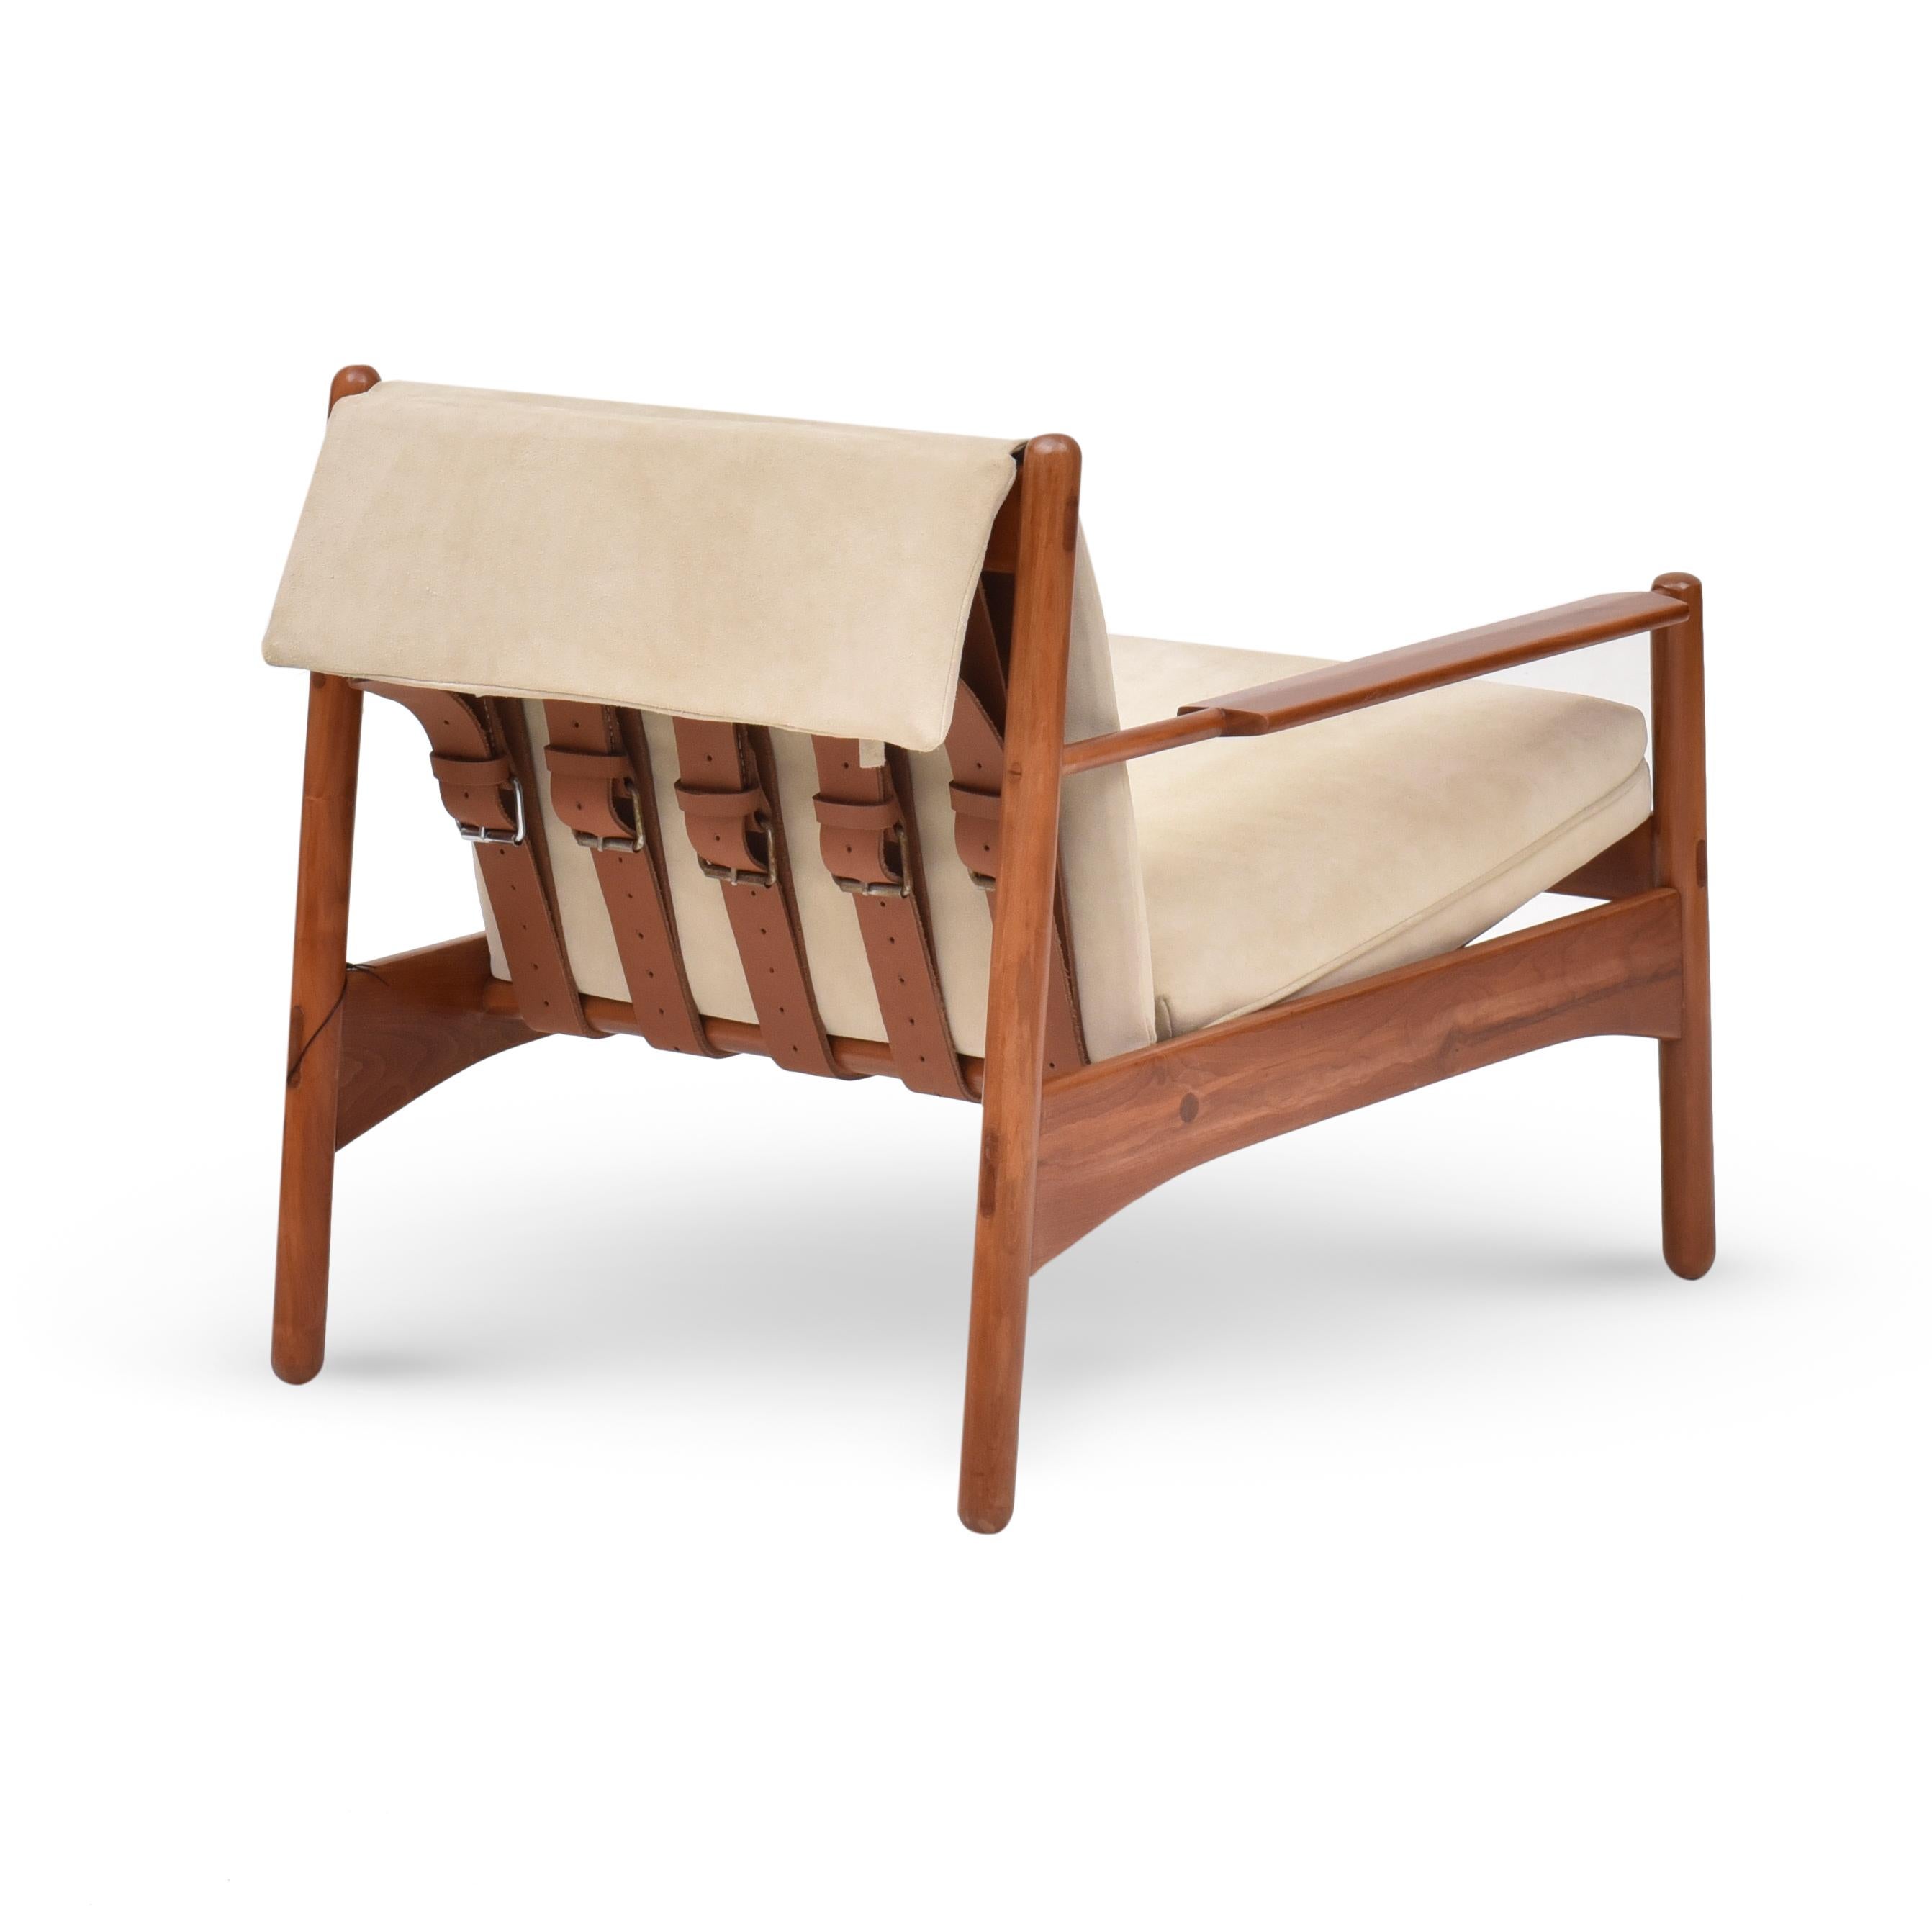 Brazilian Armchair In Perobinha Do Campo with Buckles, By Arredamento For Sale